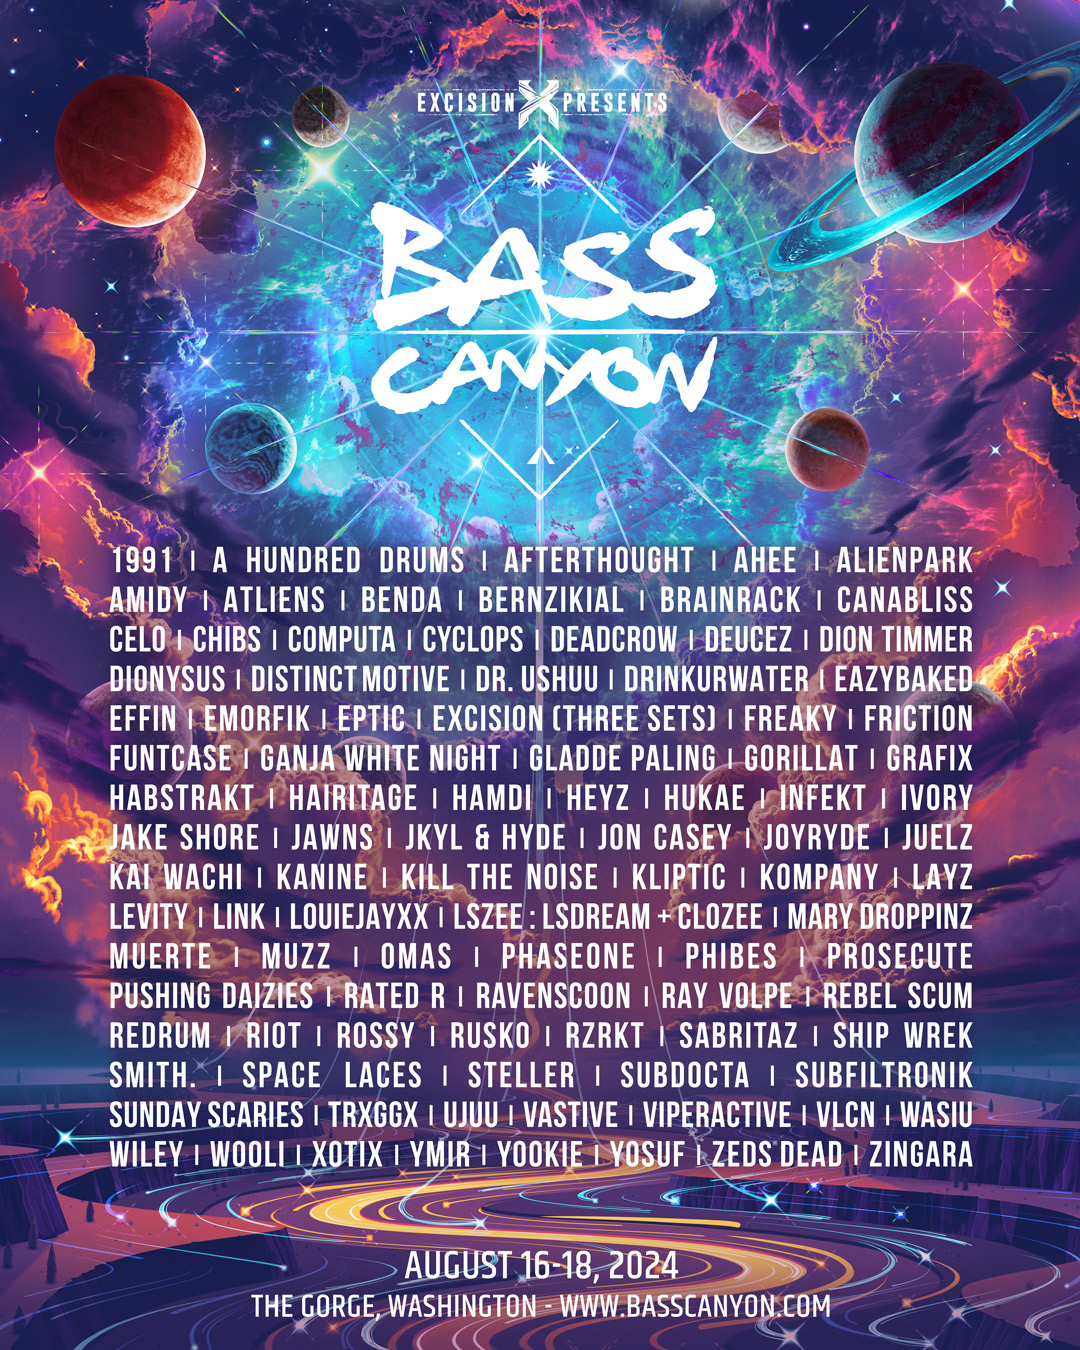 Announcing The Bass Canyon 2024 Lineup!